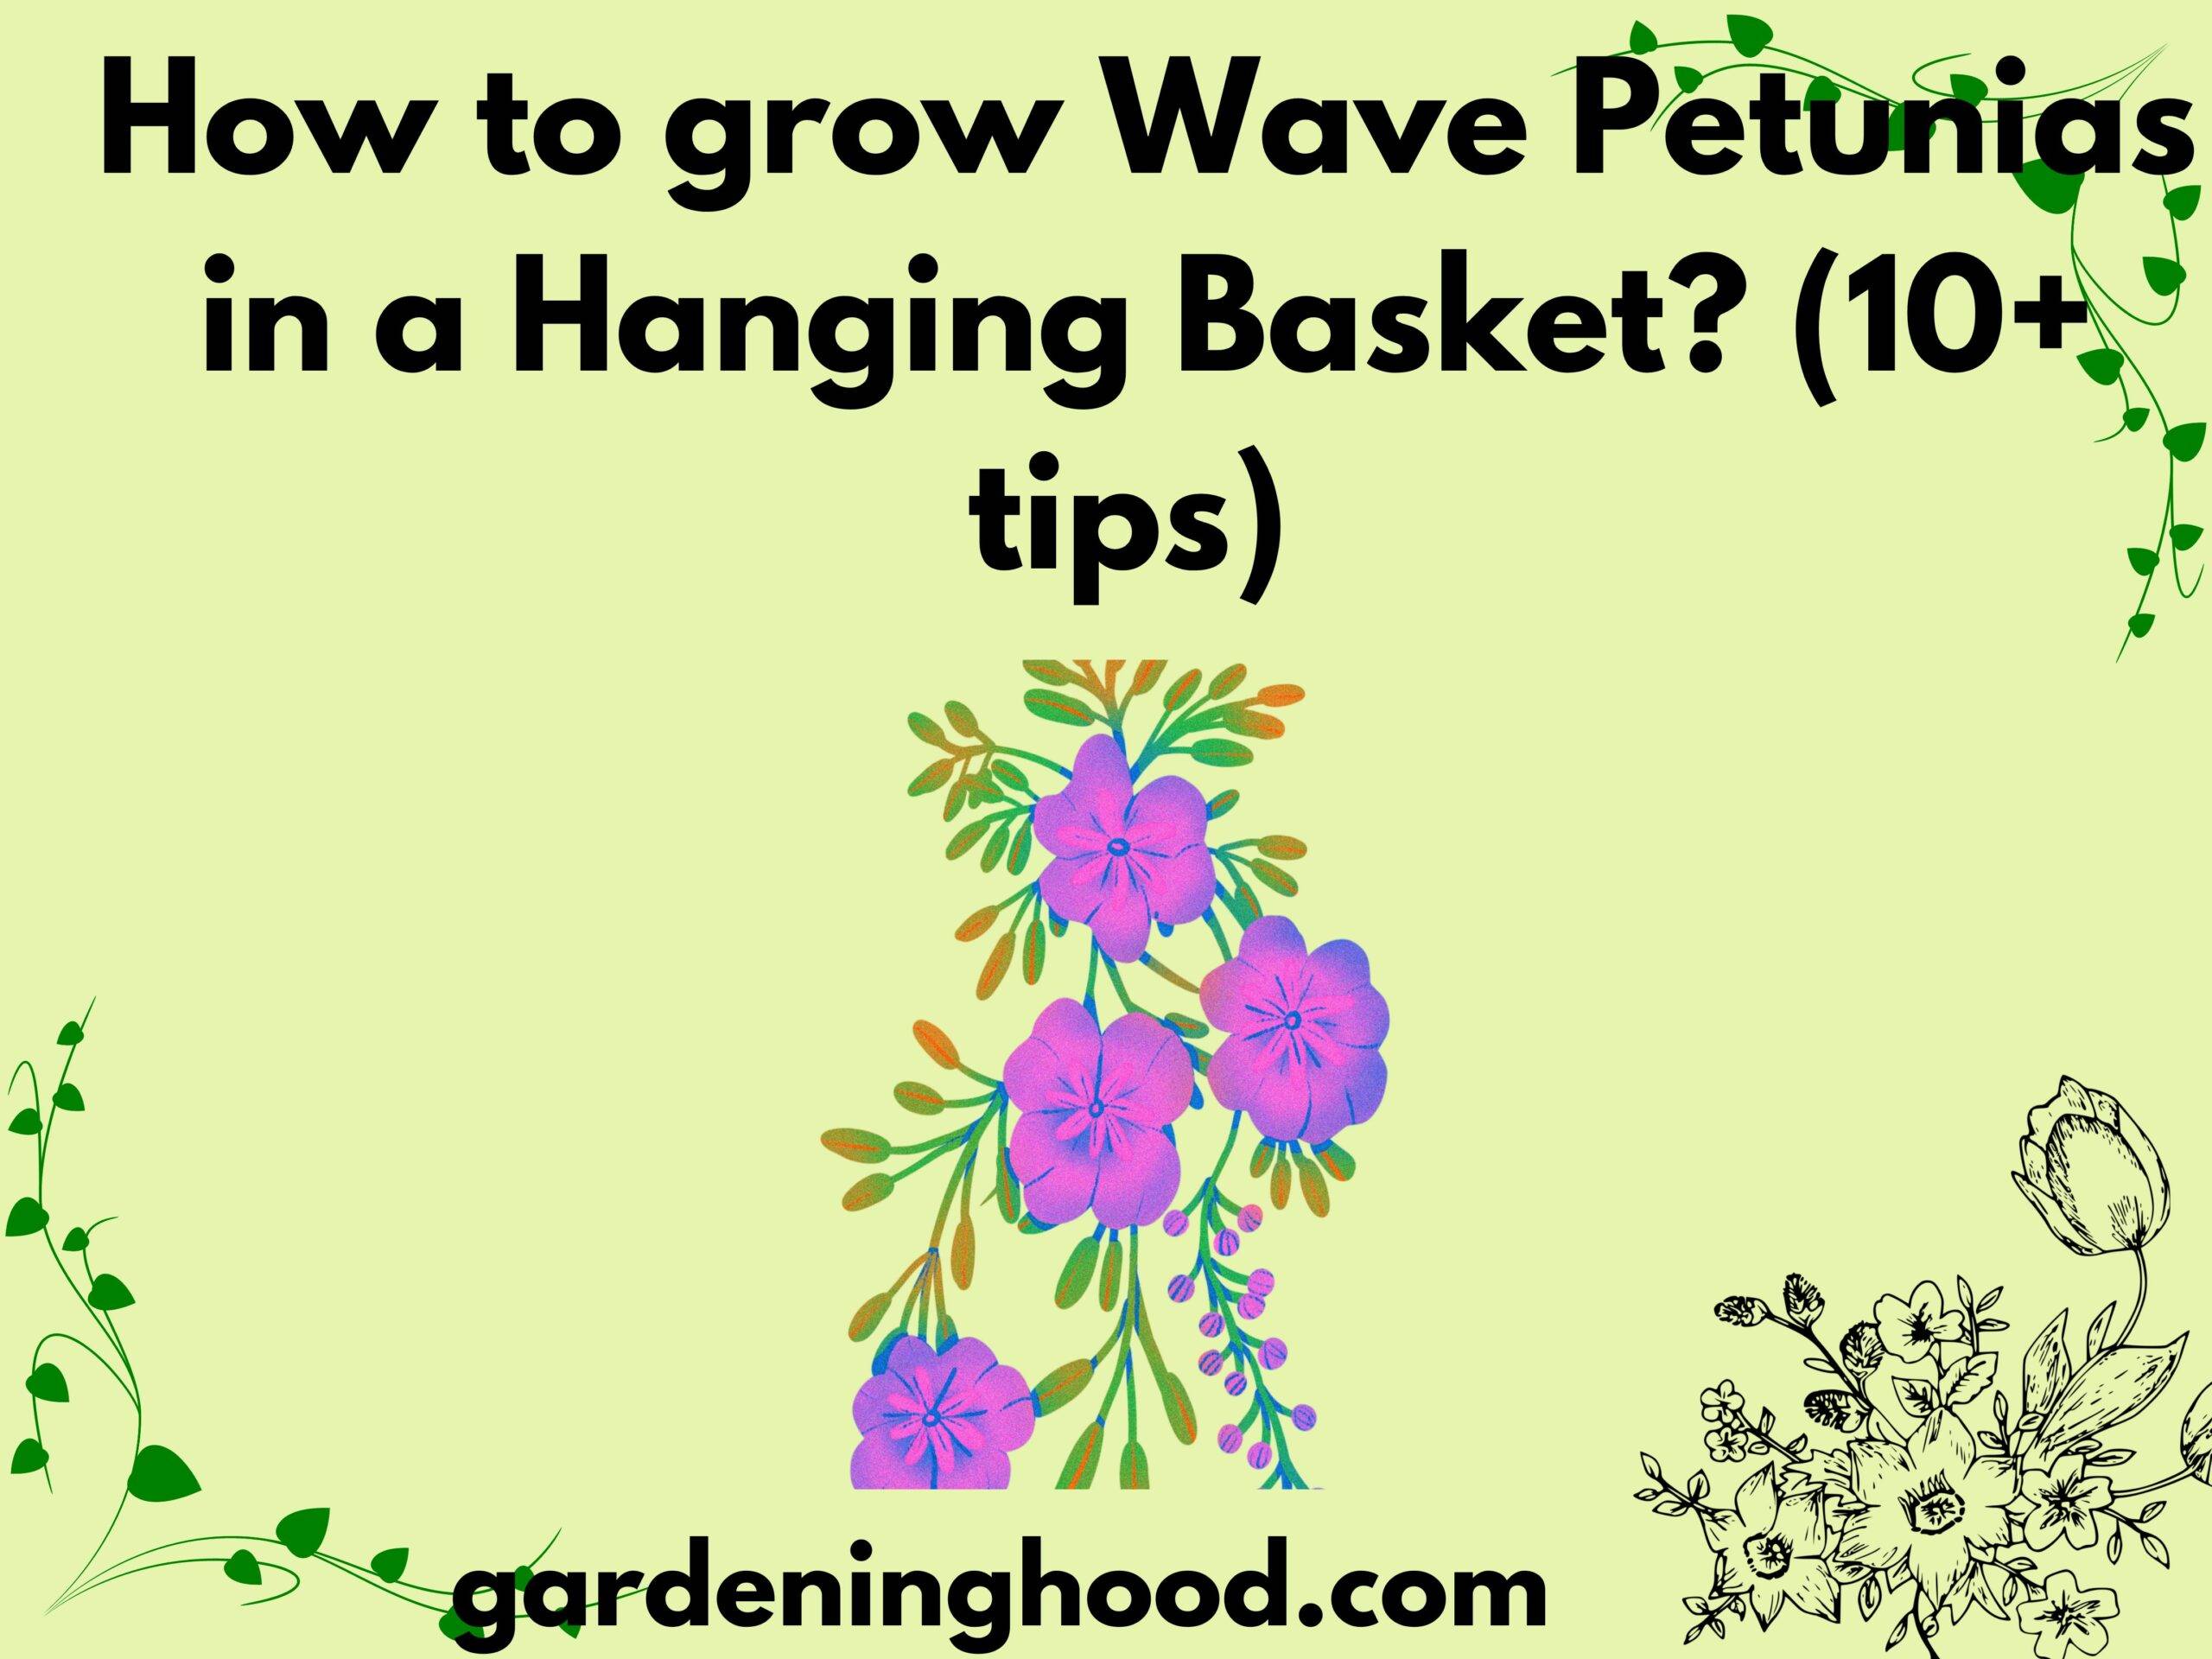 How to grow Wave Petunias in a Hanging Basket? (10+ tips) 